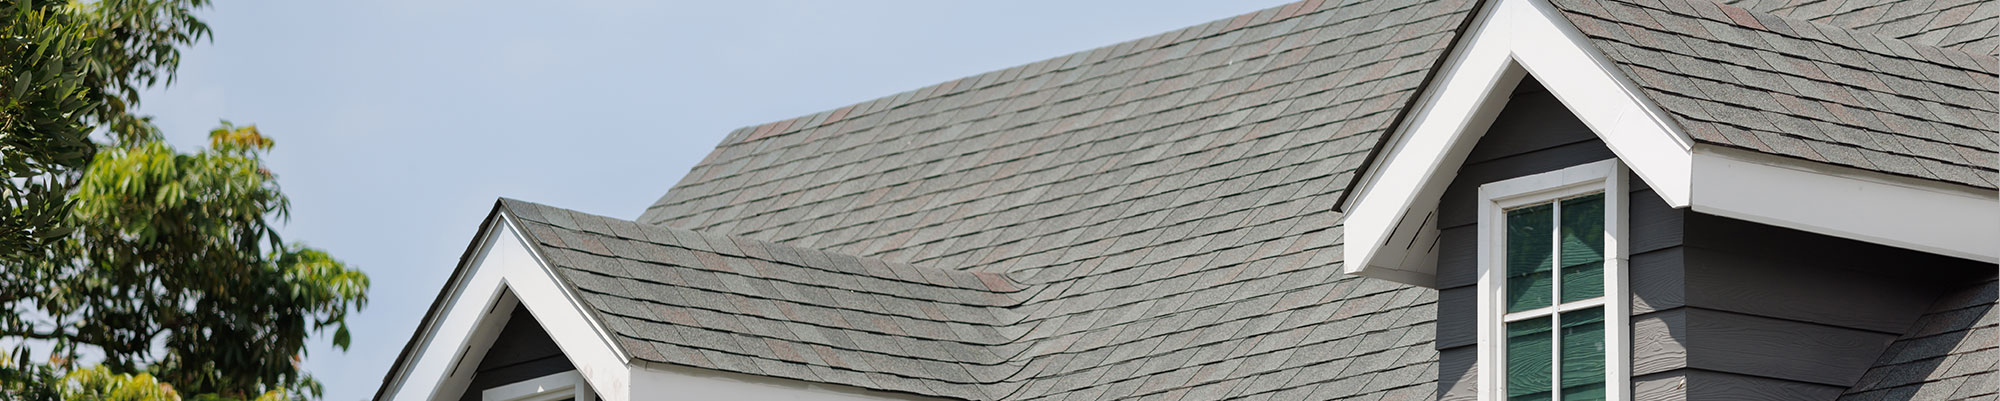 Muskego Franklin roof replacement company